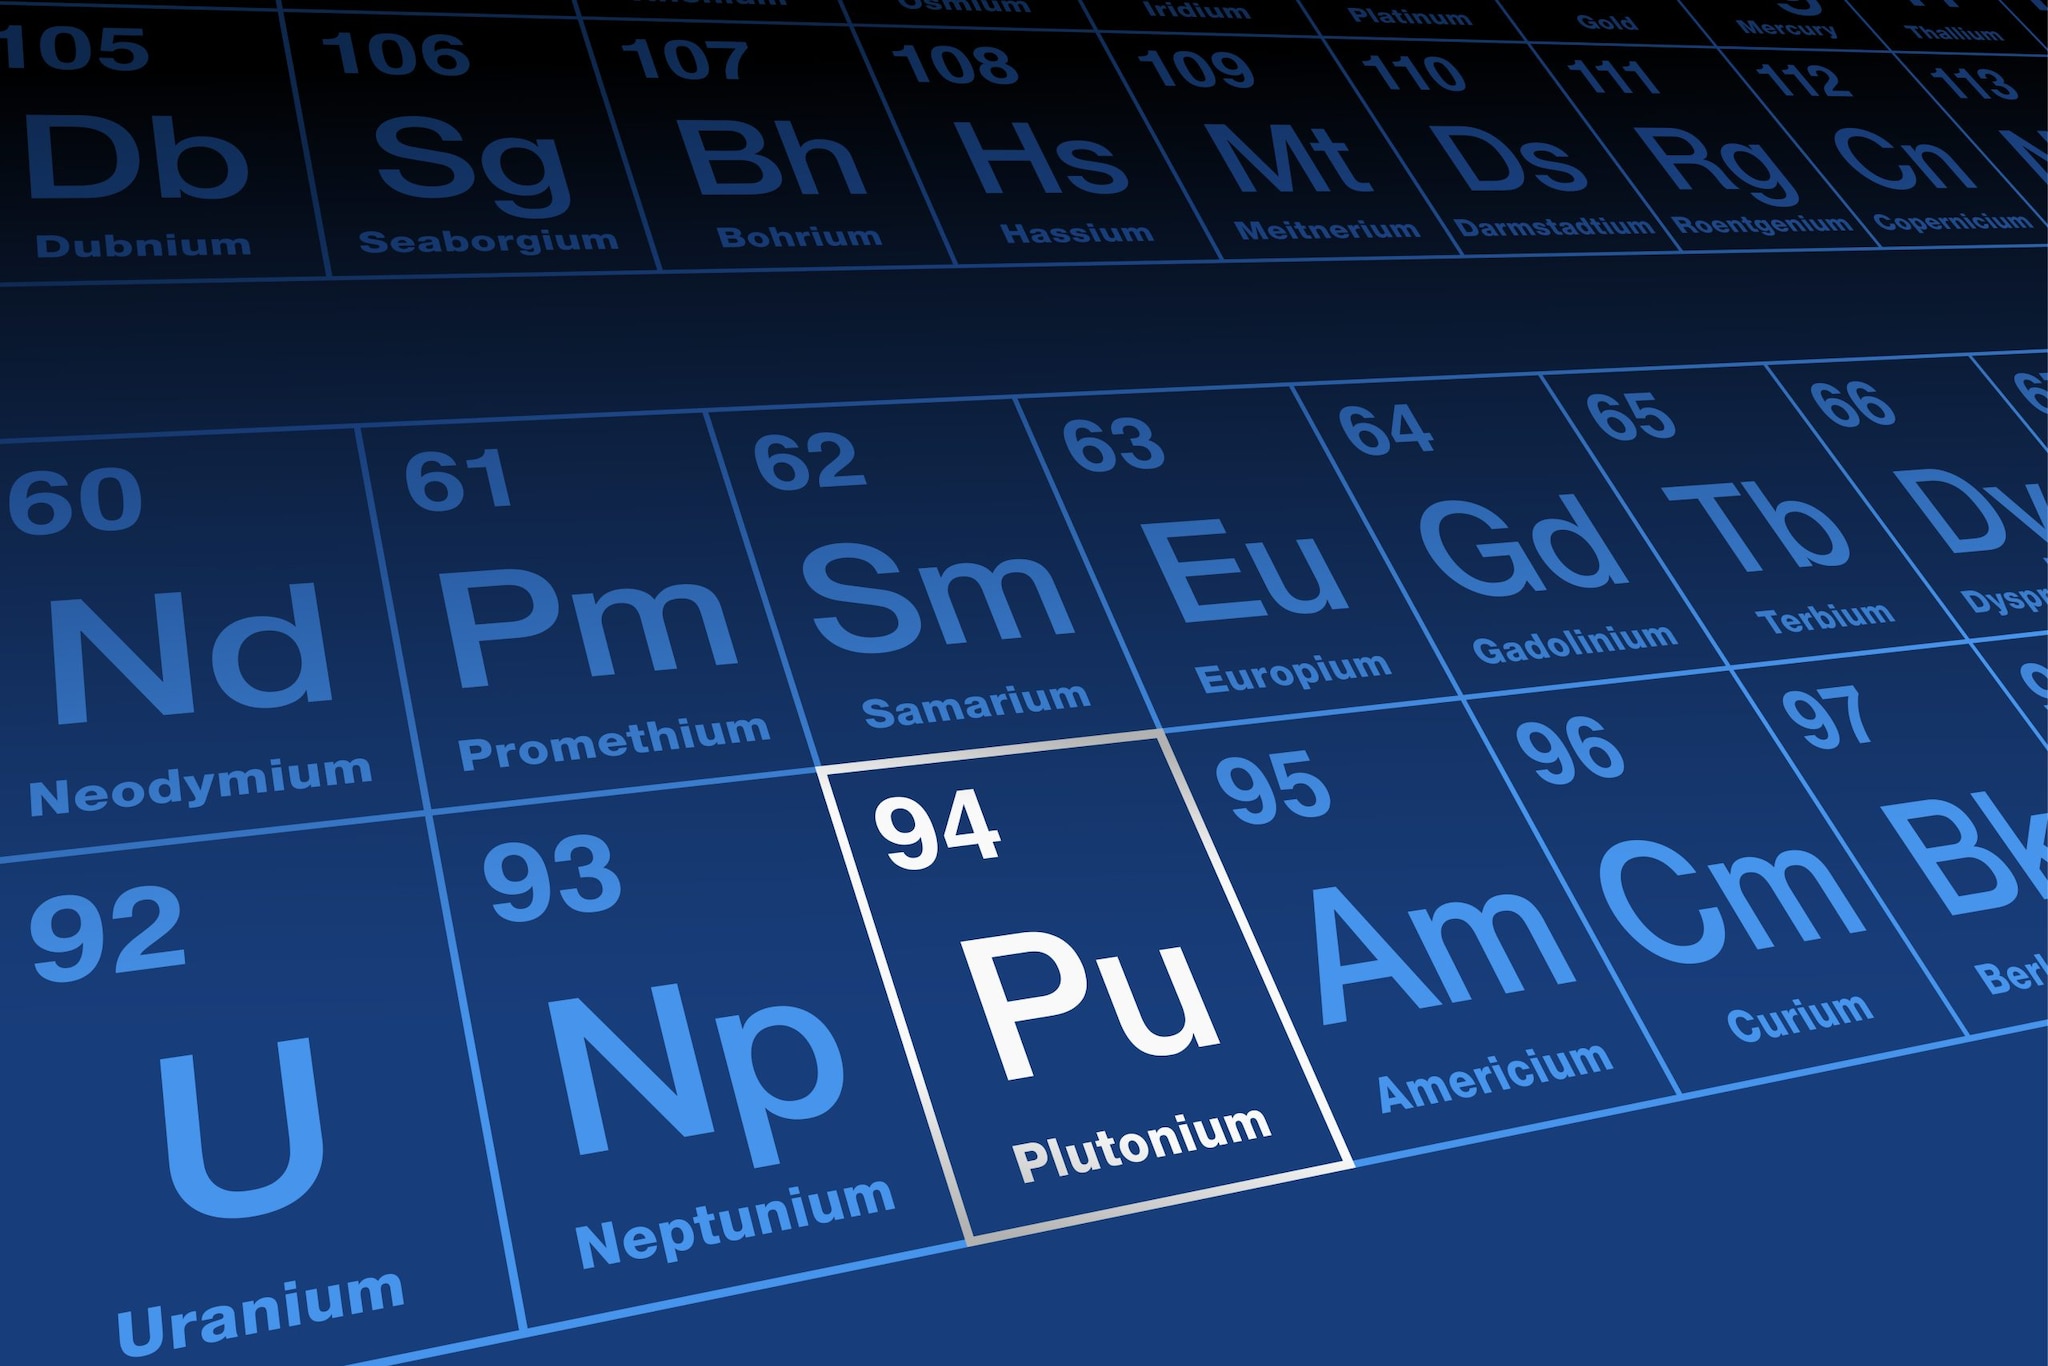 Close-up shot of the periodic table with the element Plutonium highlighted in a white box